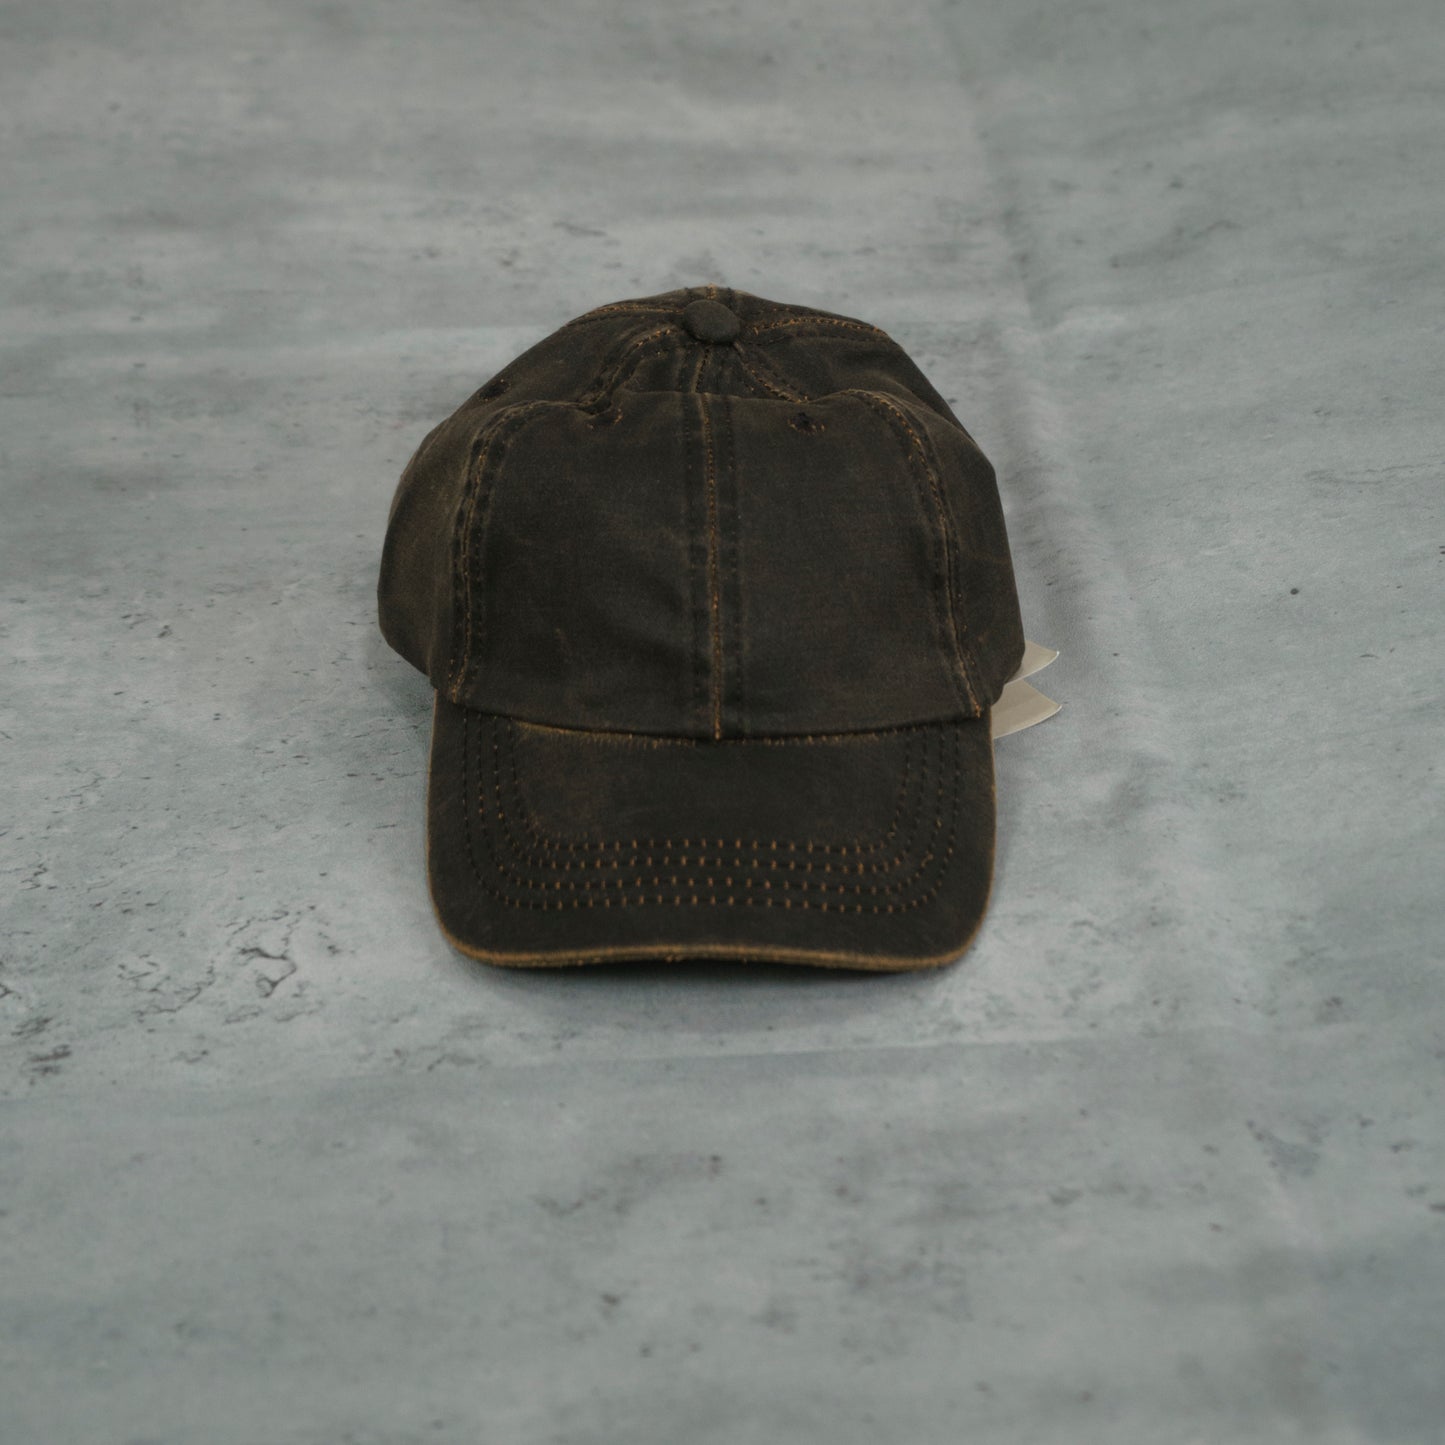 8 Seconds Weathered Dad Cap - Adjustable Buckle, Handmade, One Size, Hat